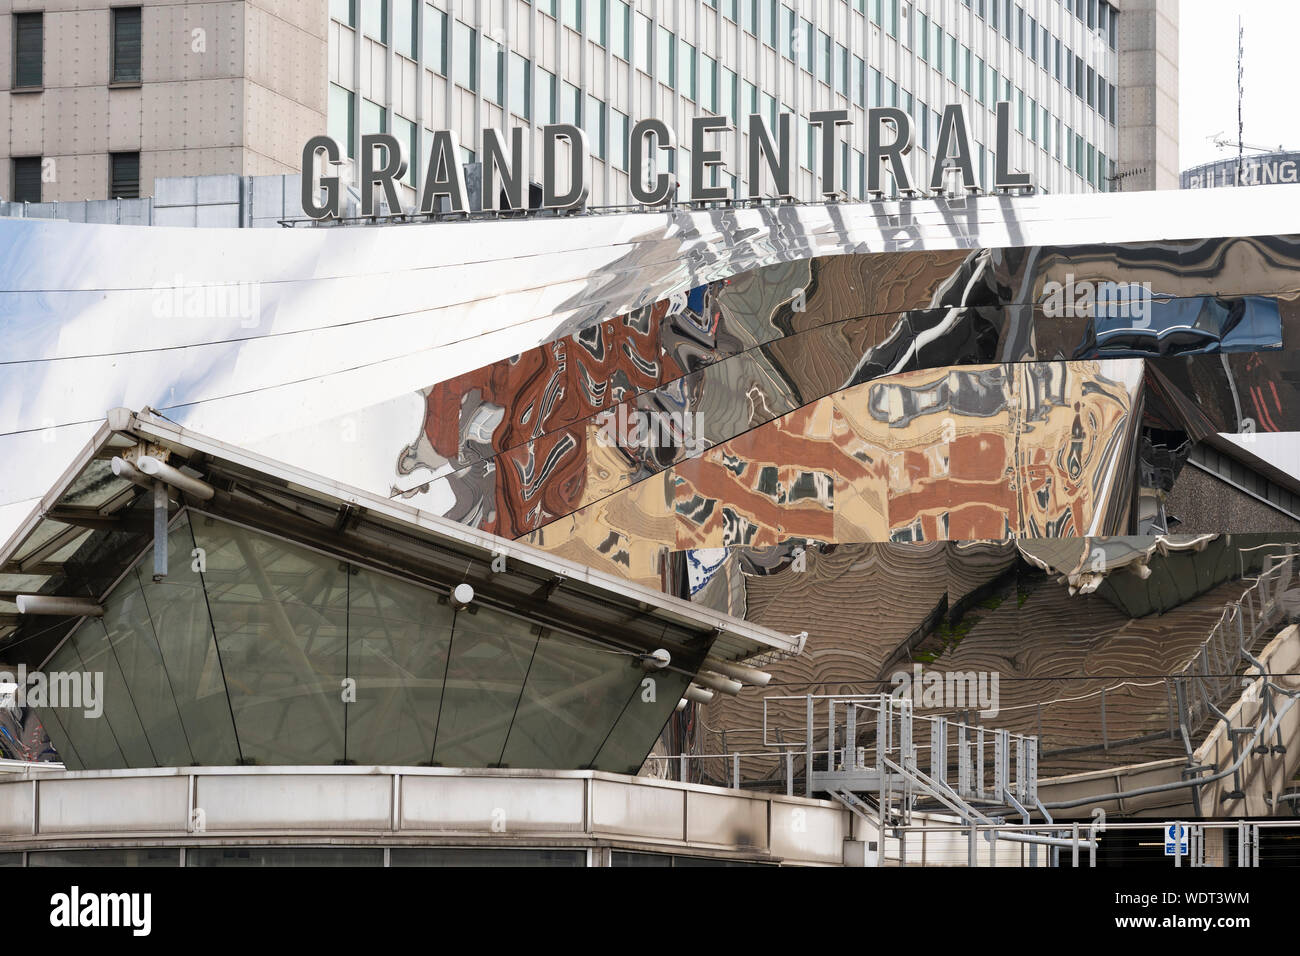 The modern stainless steel facade of Grand Central shopping centre in Birmingham contrasts with the 1960s Birmingham New Street station below Stock Photo